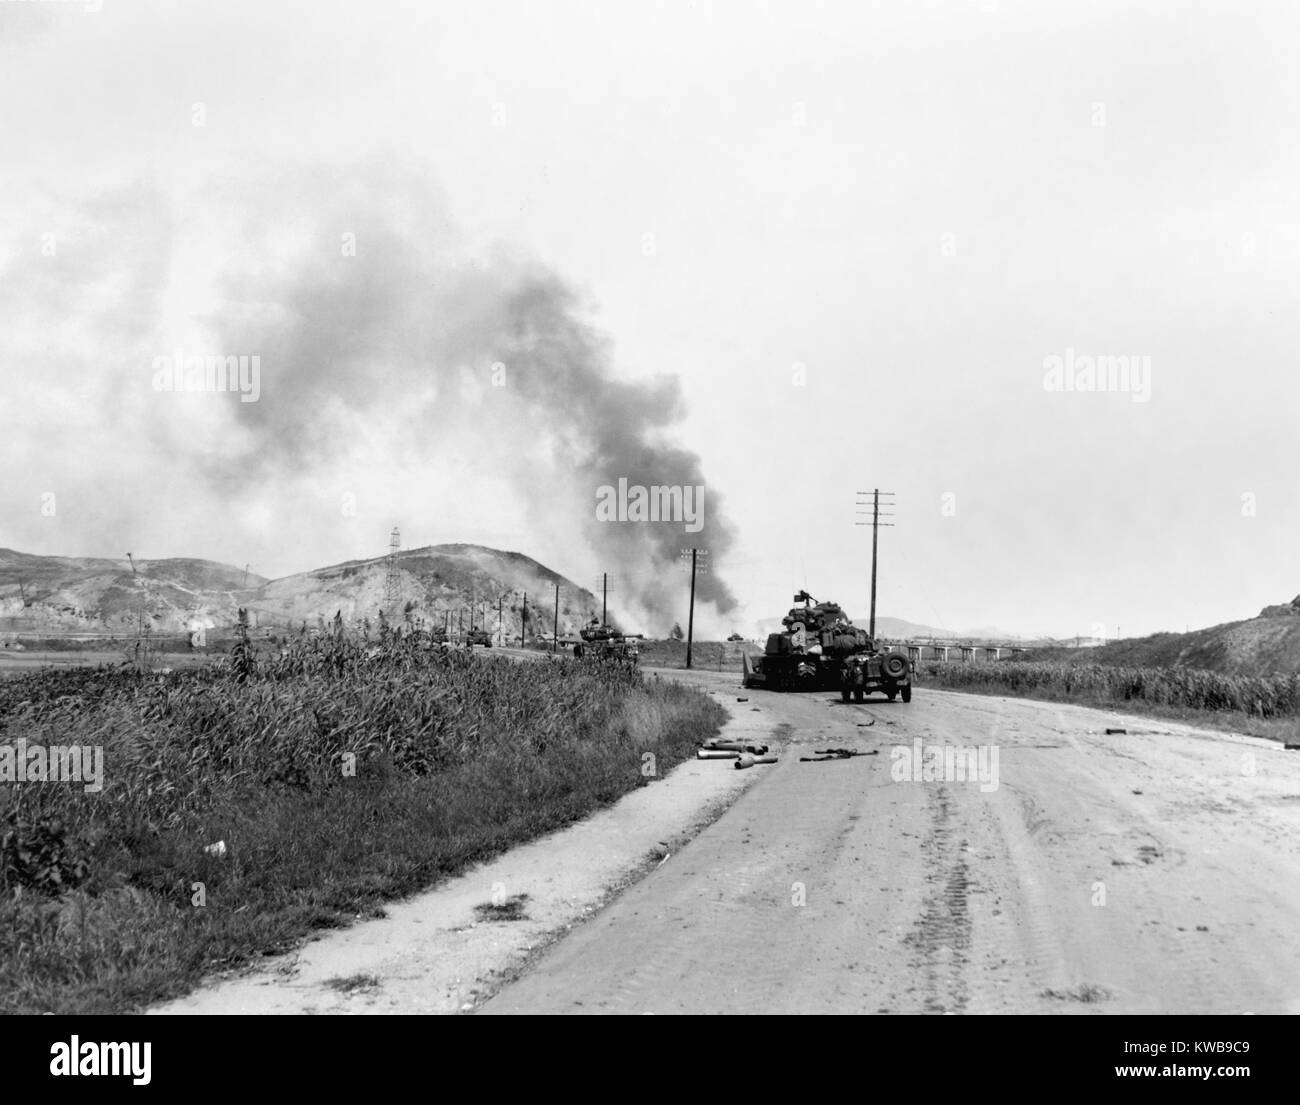 U.S. Marine tanks blast their way through North Korean strong points near Seoul allowing infantrymen to advance. 1st Marine Division of the Inchon-Seoul Highway. Ca. Sept 18-21, 1950. Korean War, 1950-53. (BSLOC 2014 11 51) Stock Photo